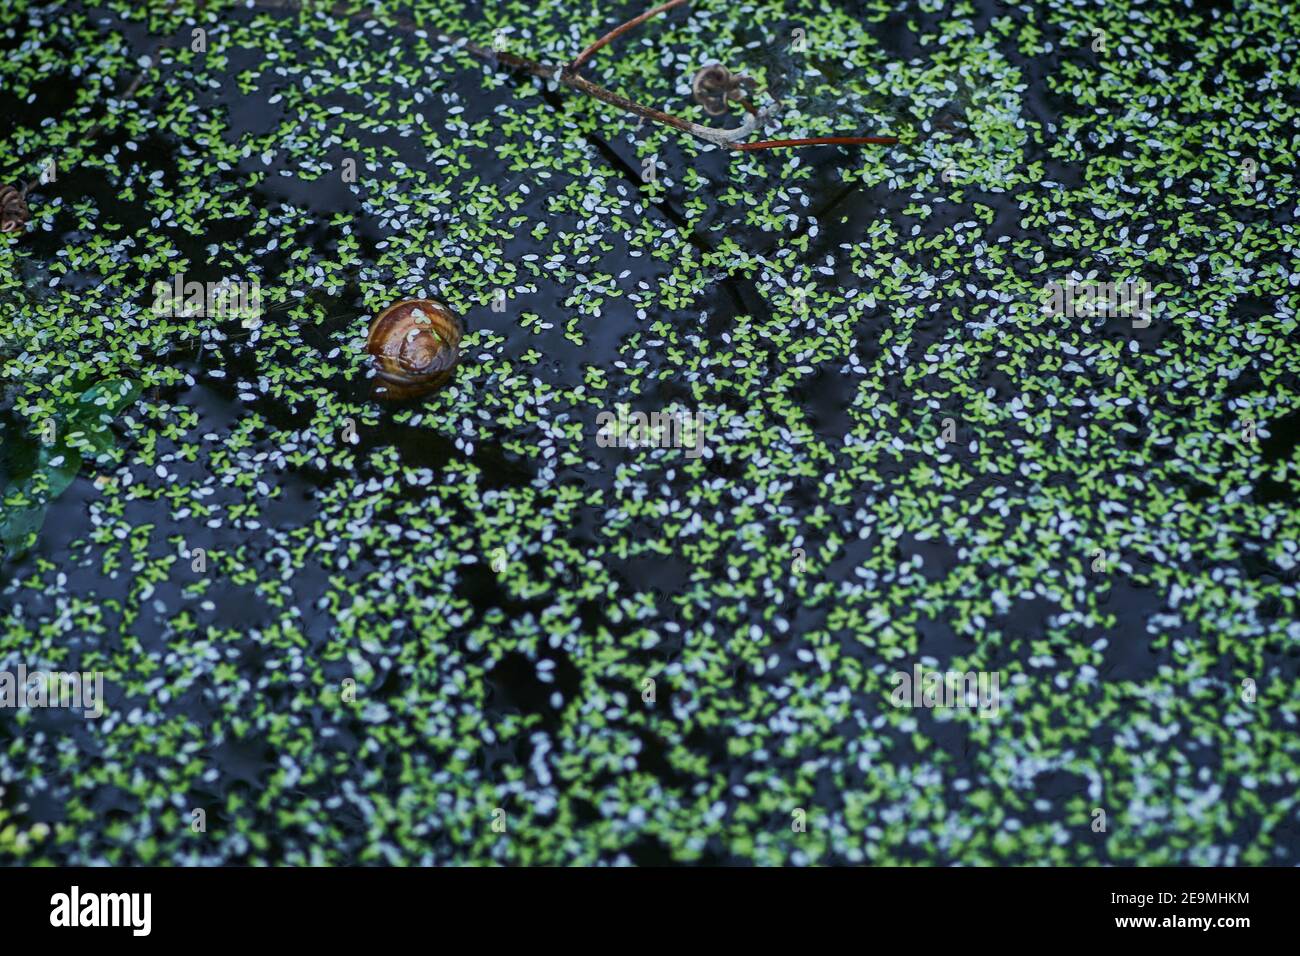 Closeup shot of a snail and duckweed leaves in the water Stock Photo